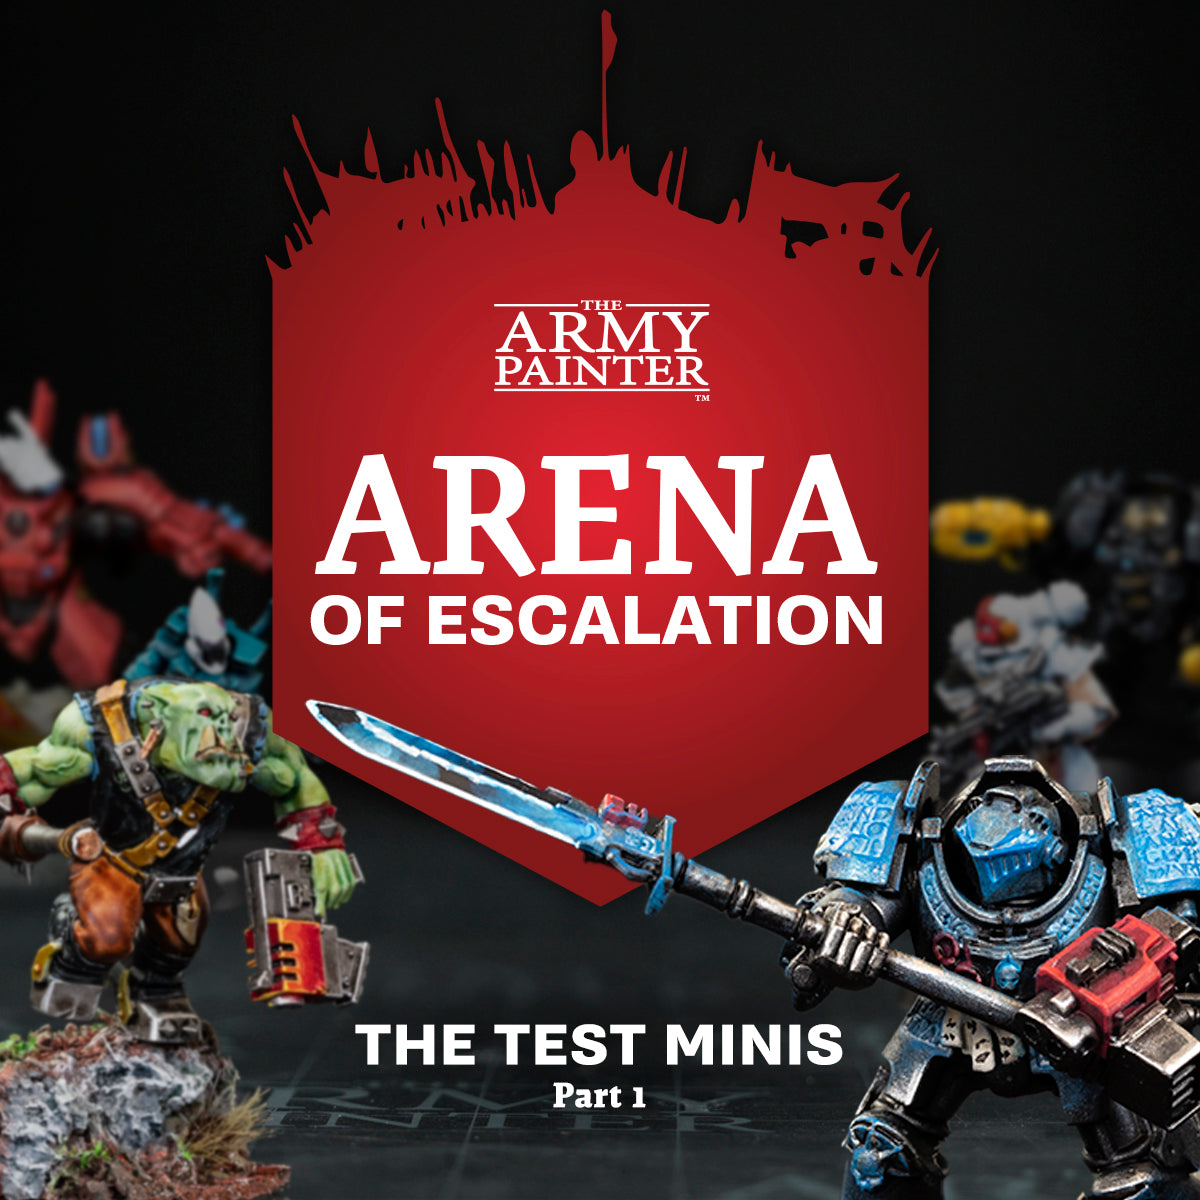 The Arena of Escalation: The Test Minis - Part 1